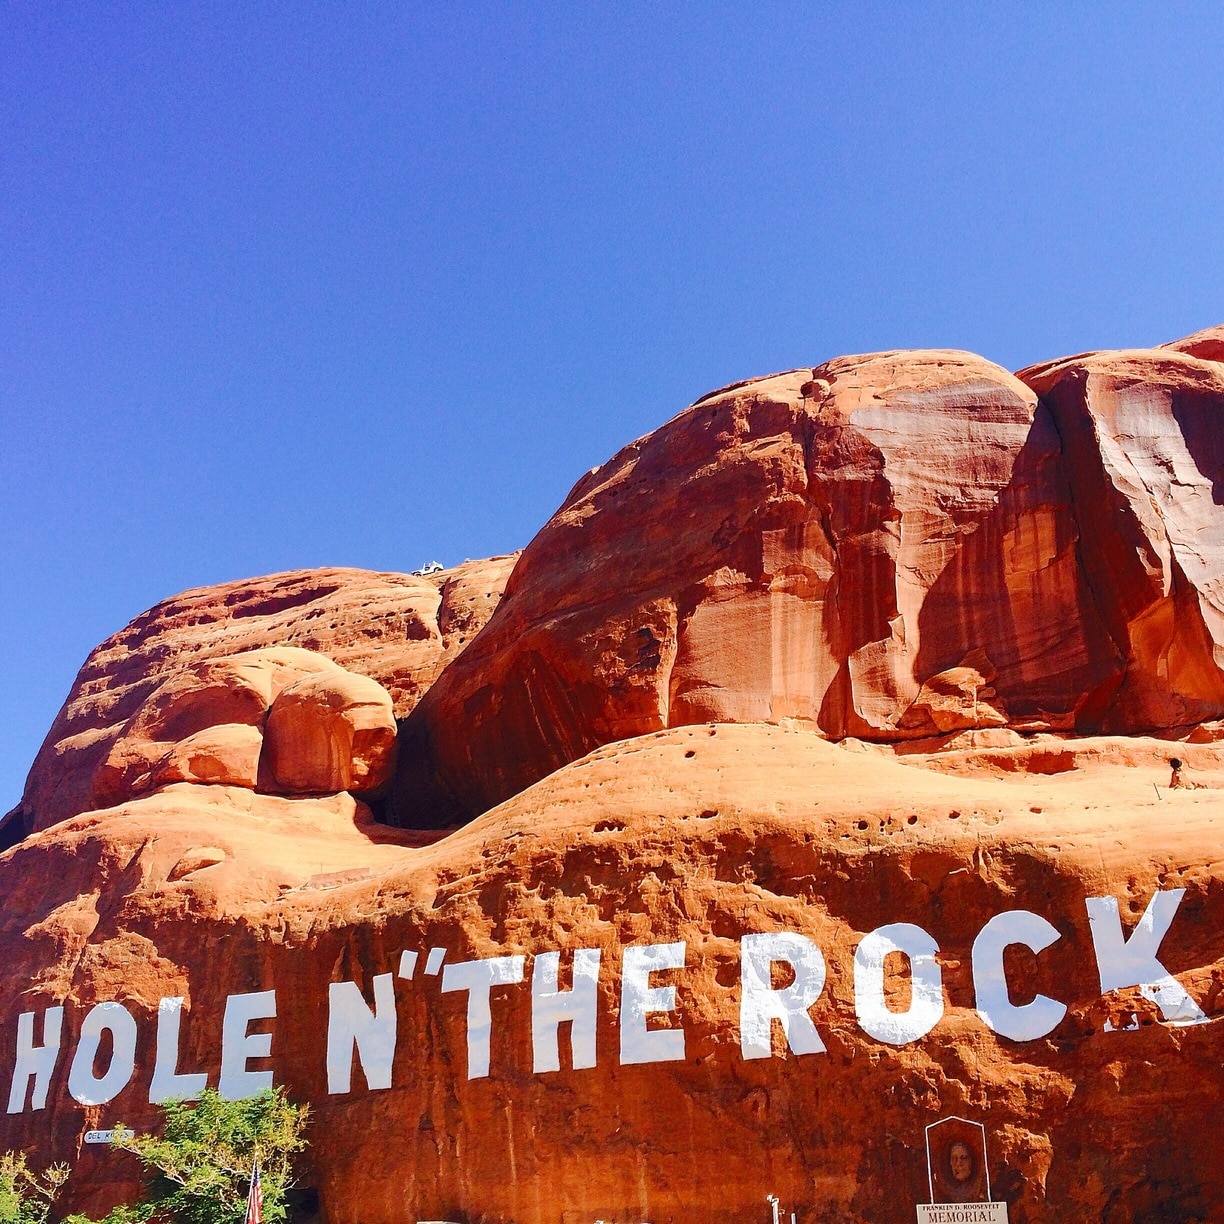 Hole n the Rock, just outside of Moab, Utah. An incredible 5000sq feet home drilled and blasted into the rock.  